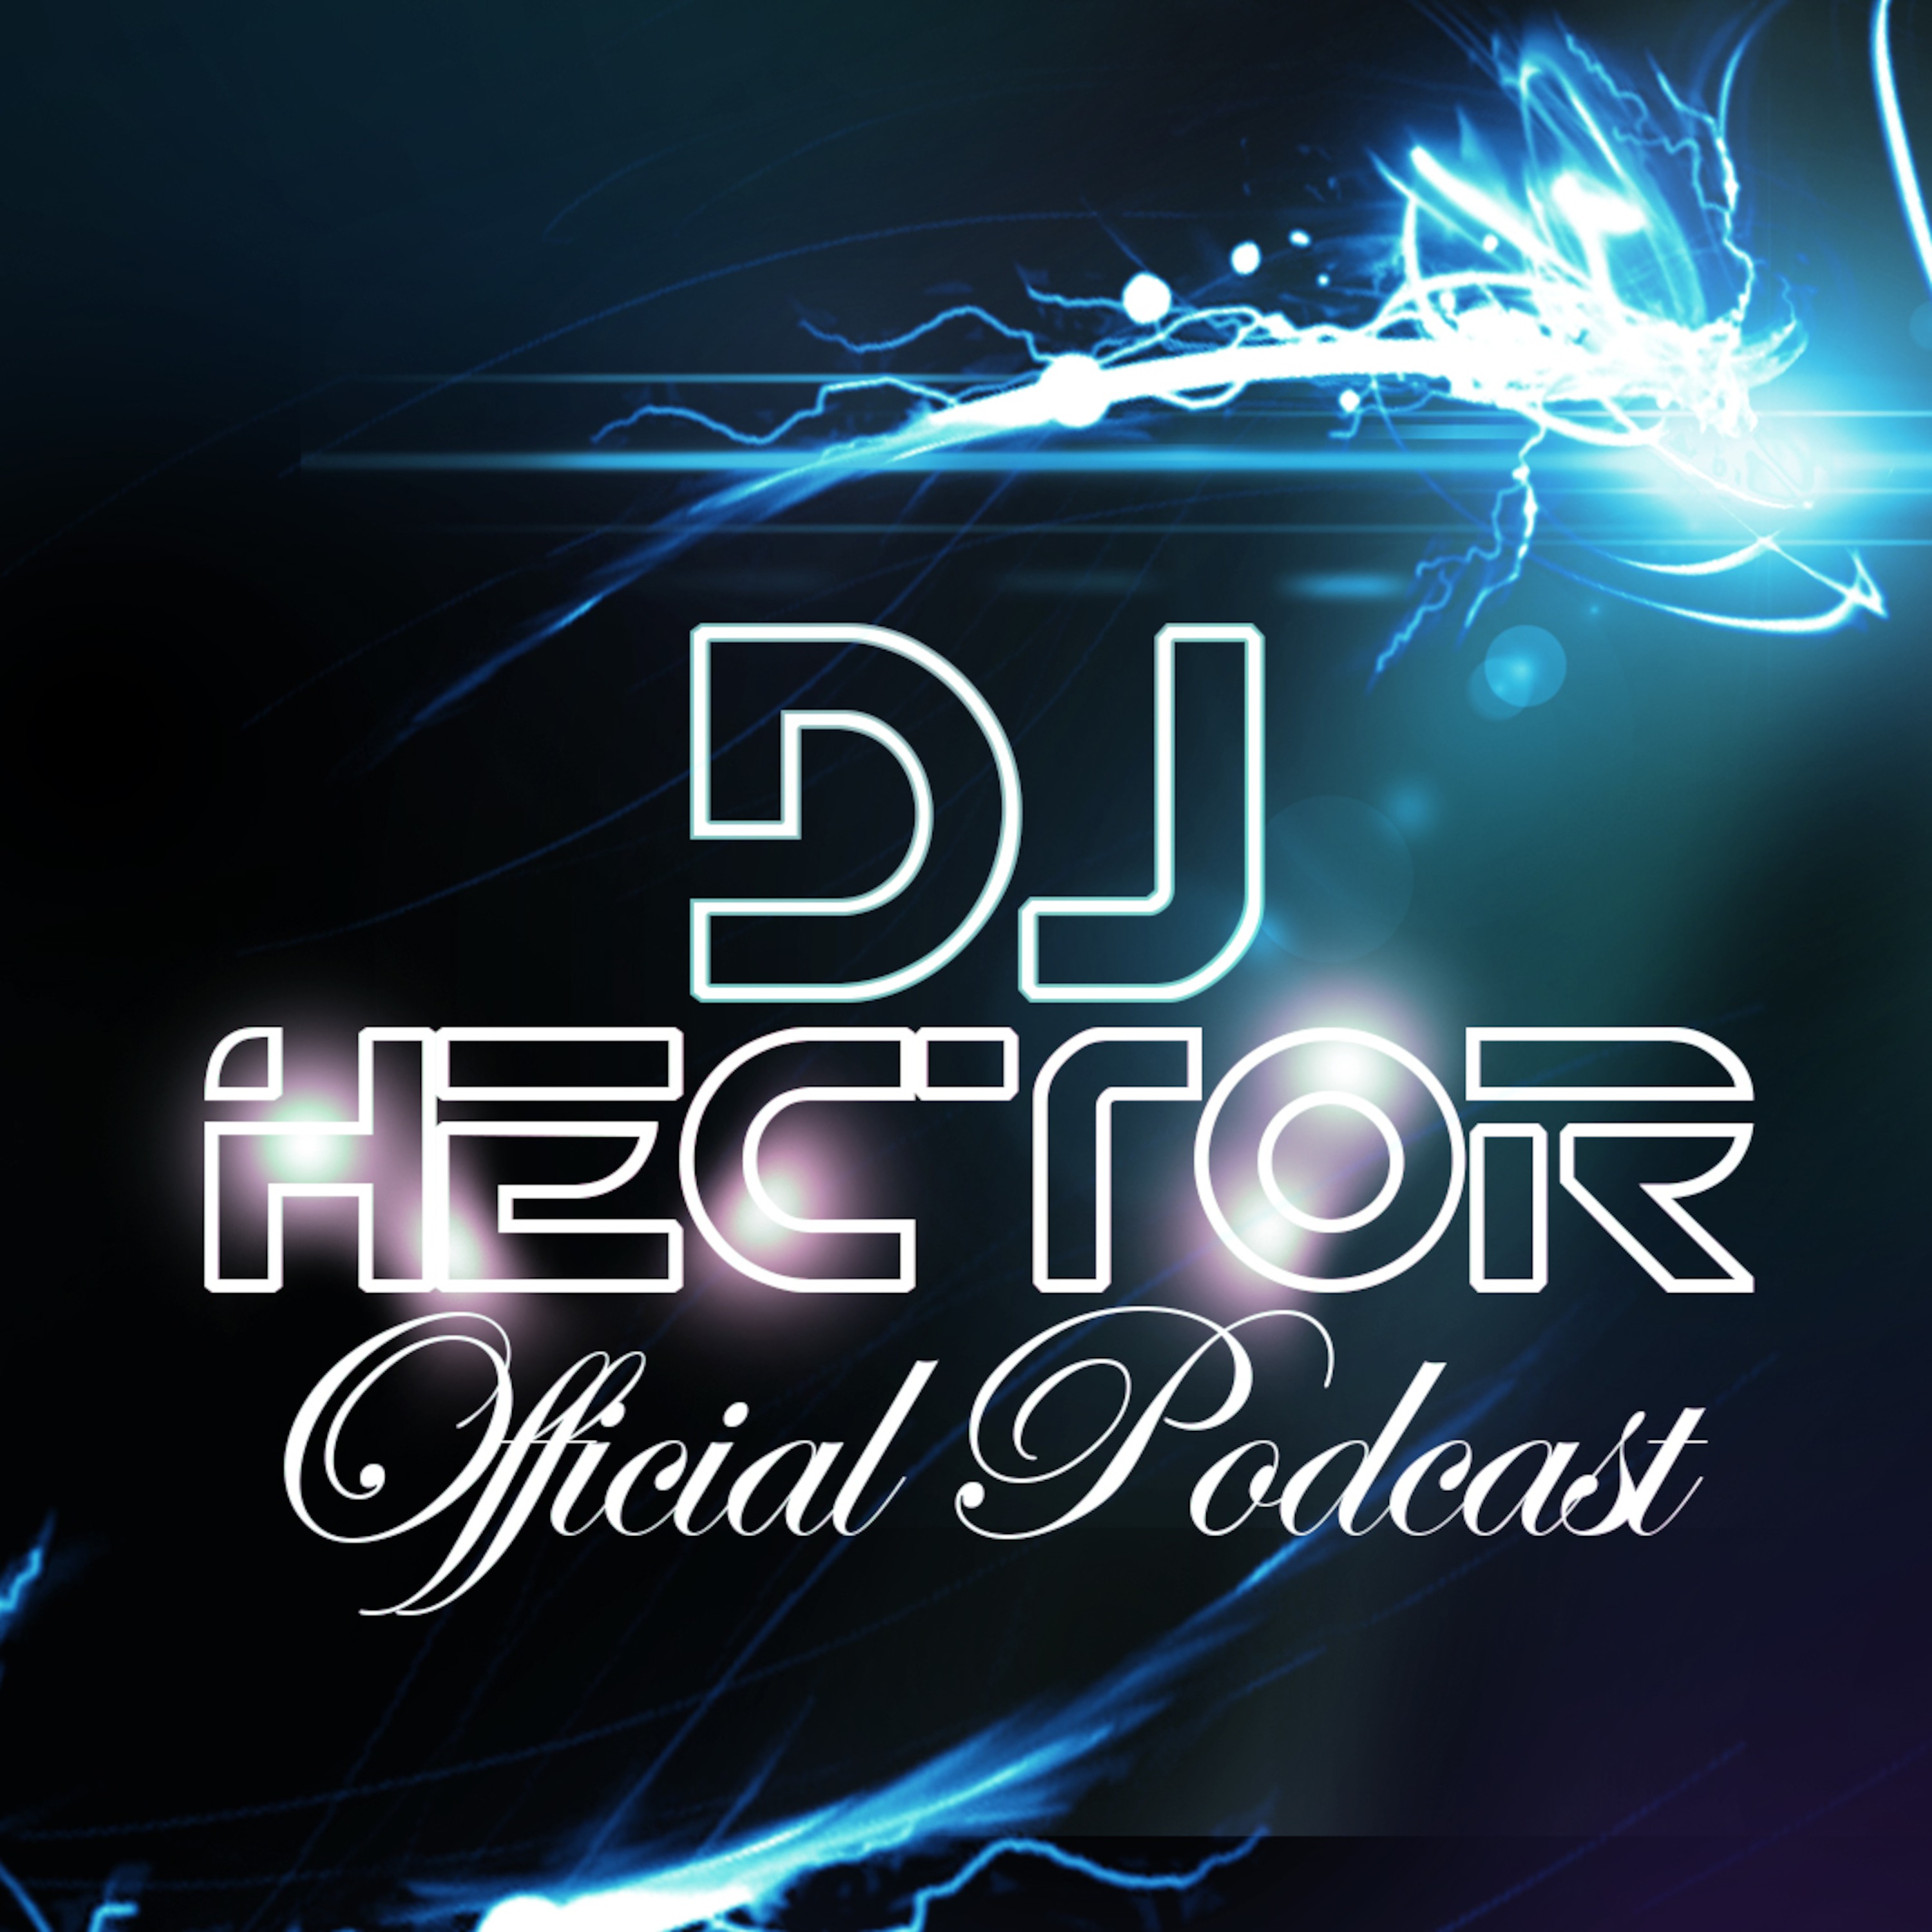 DJ Hector Official Podcast